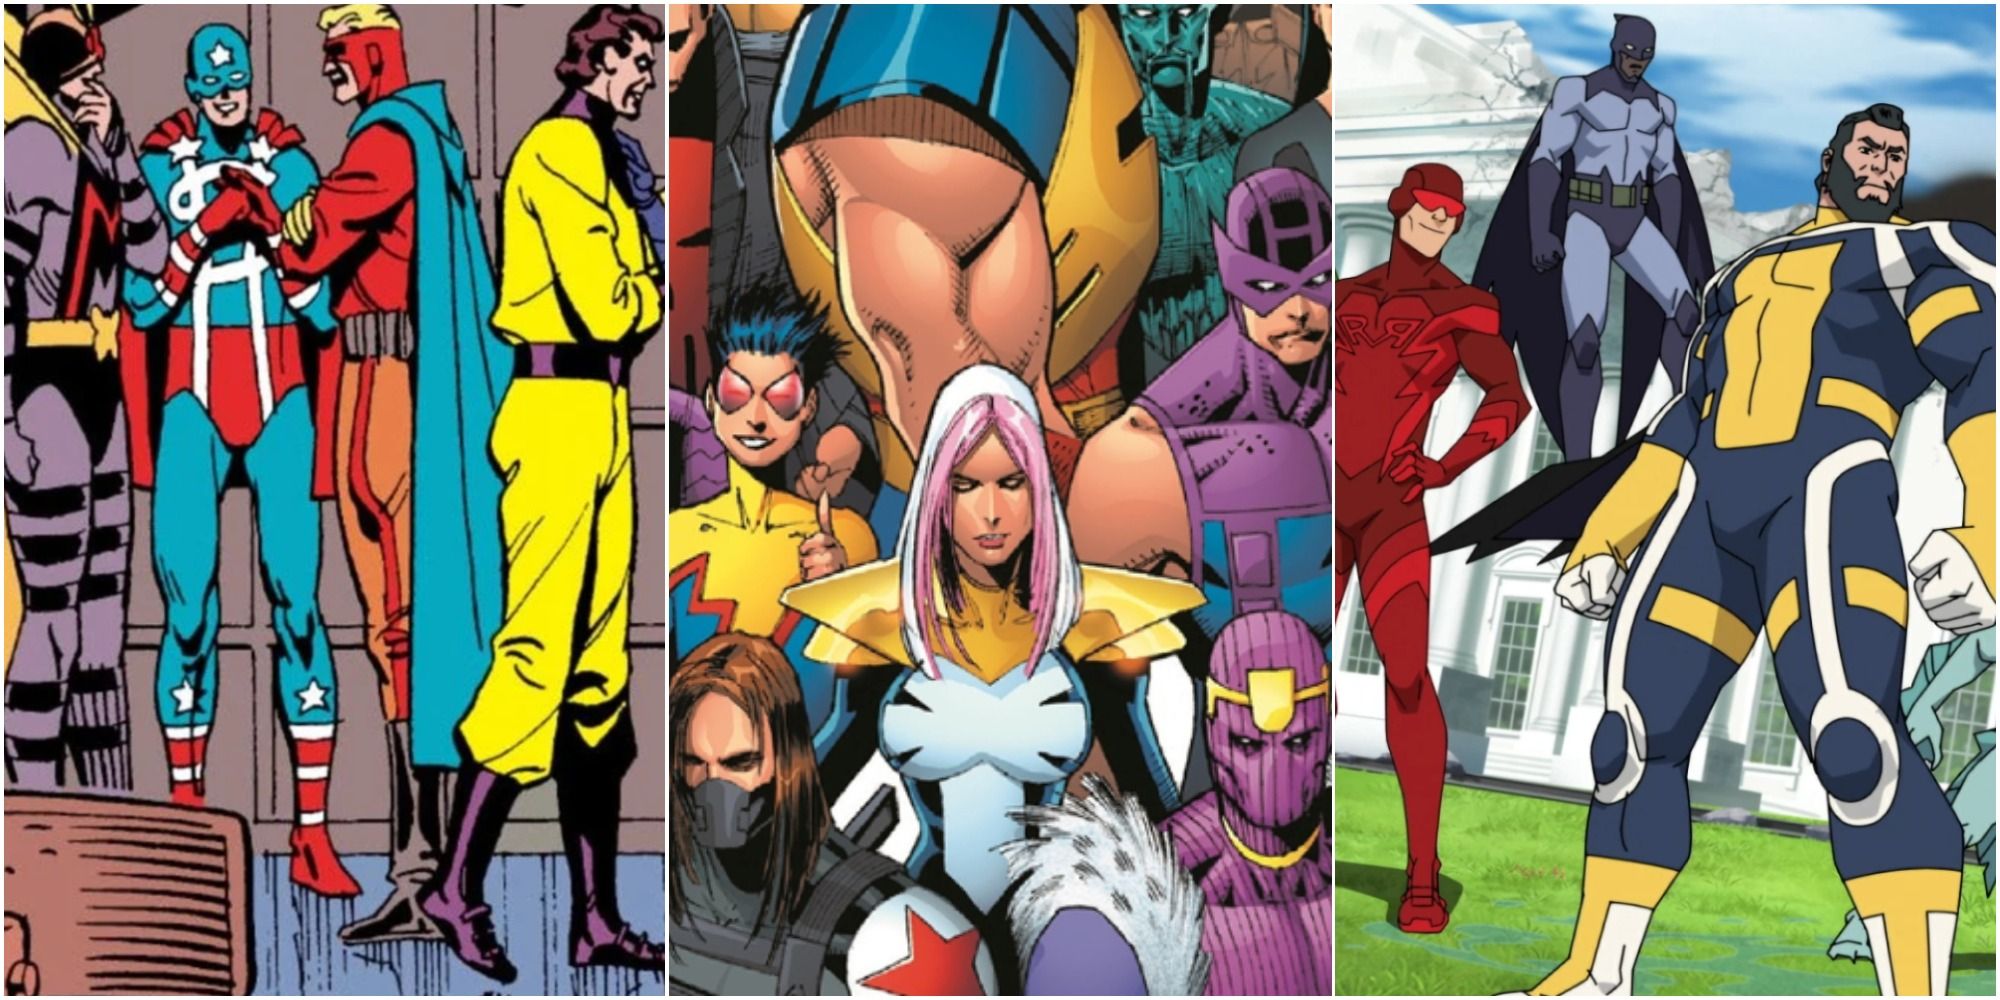 on the left are the Minutemen from Watchmen, in the middle are the Thunderbotls and on the right are The Guardians of the Globe from Invincible